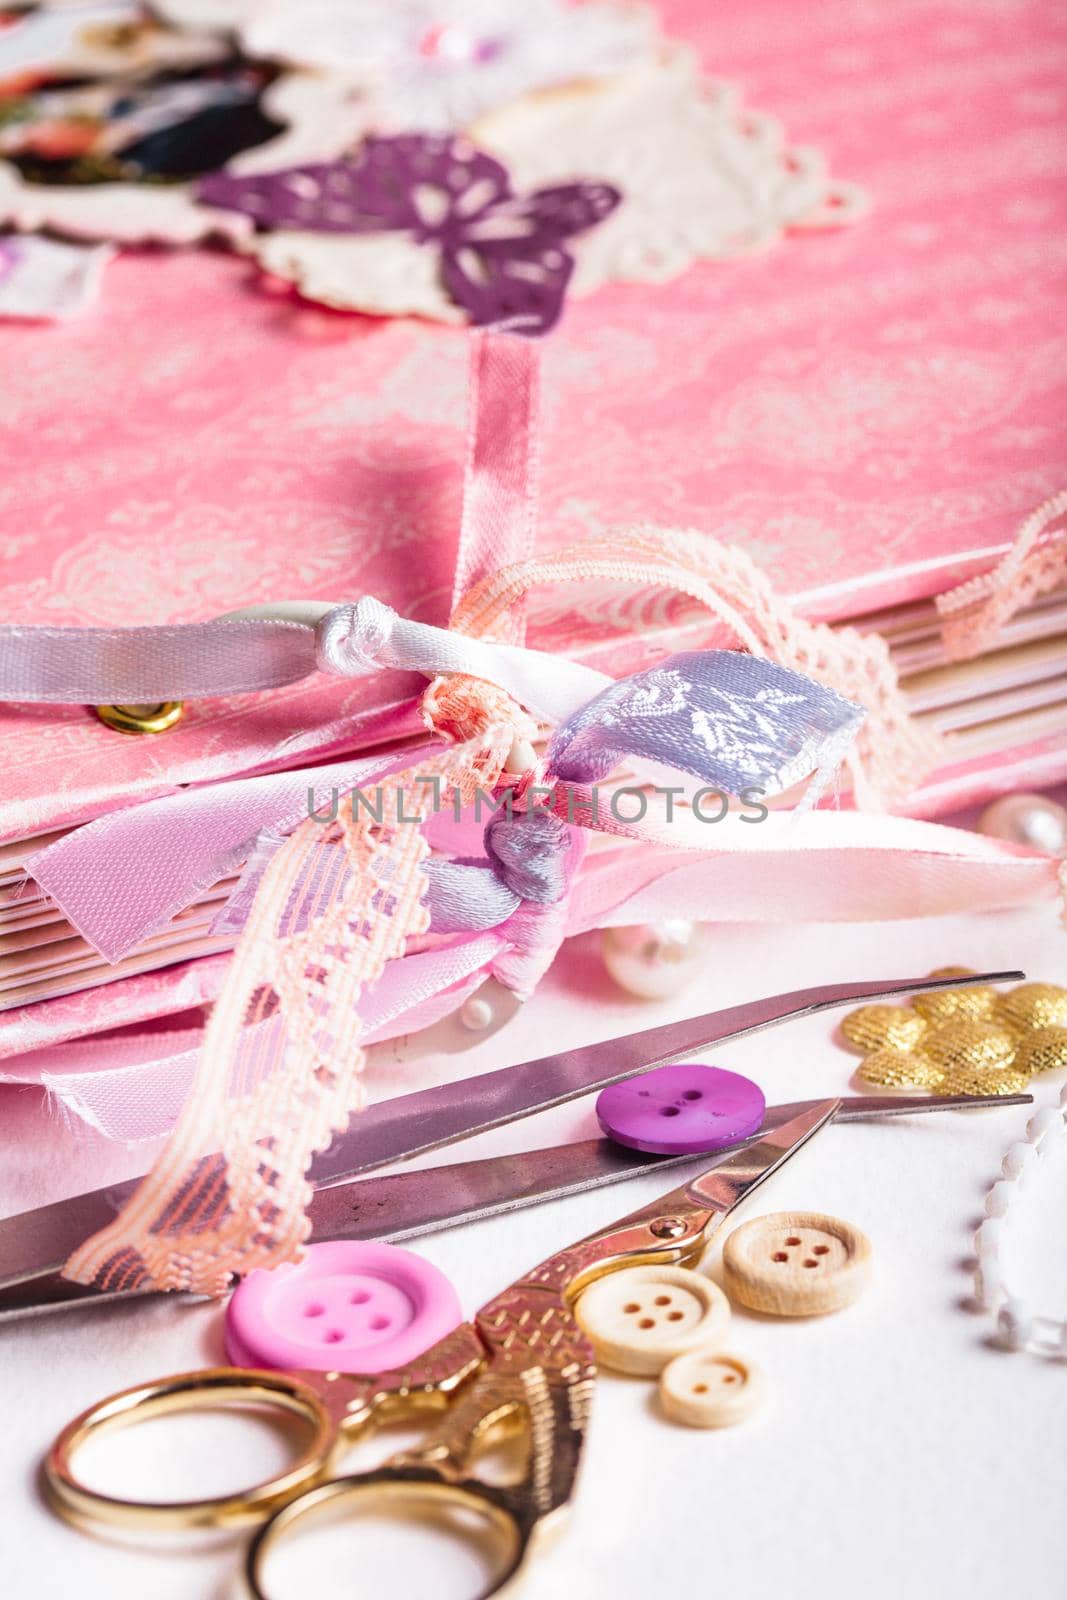 making scrapbooking album with rings and decorations on the table and tools